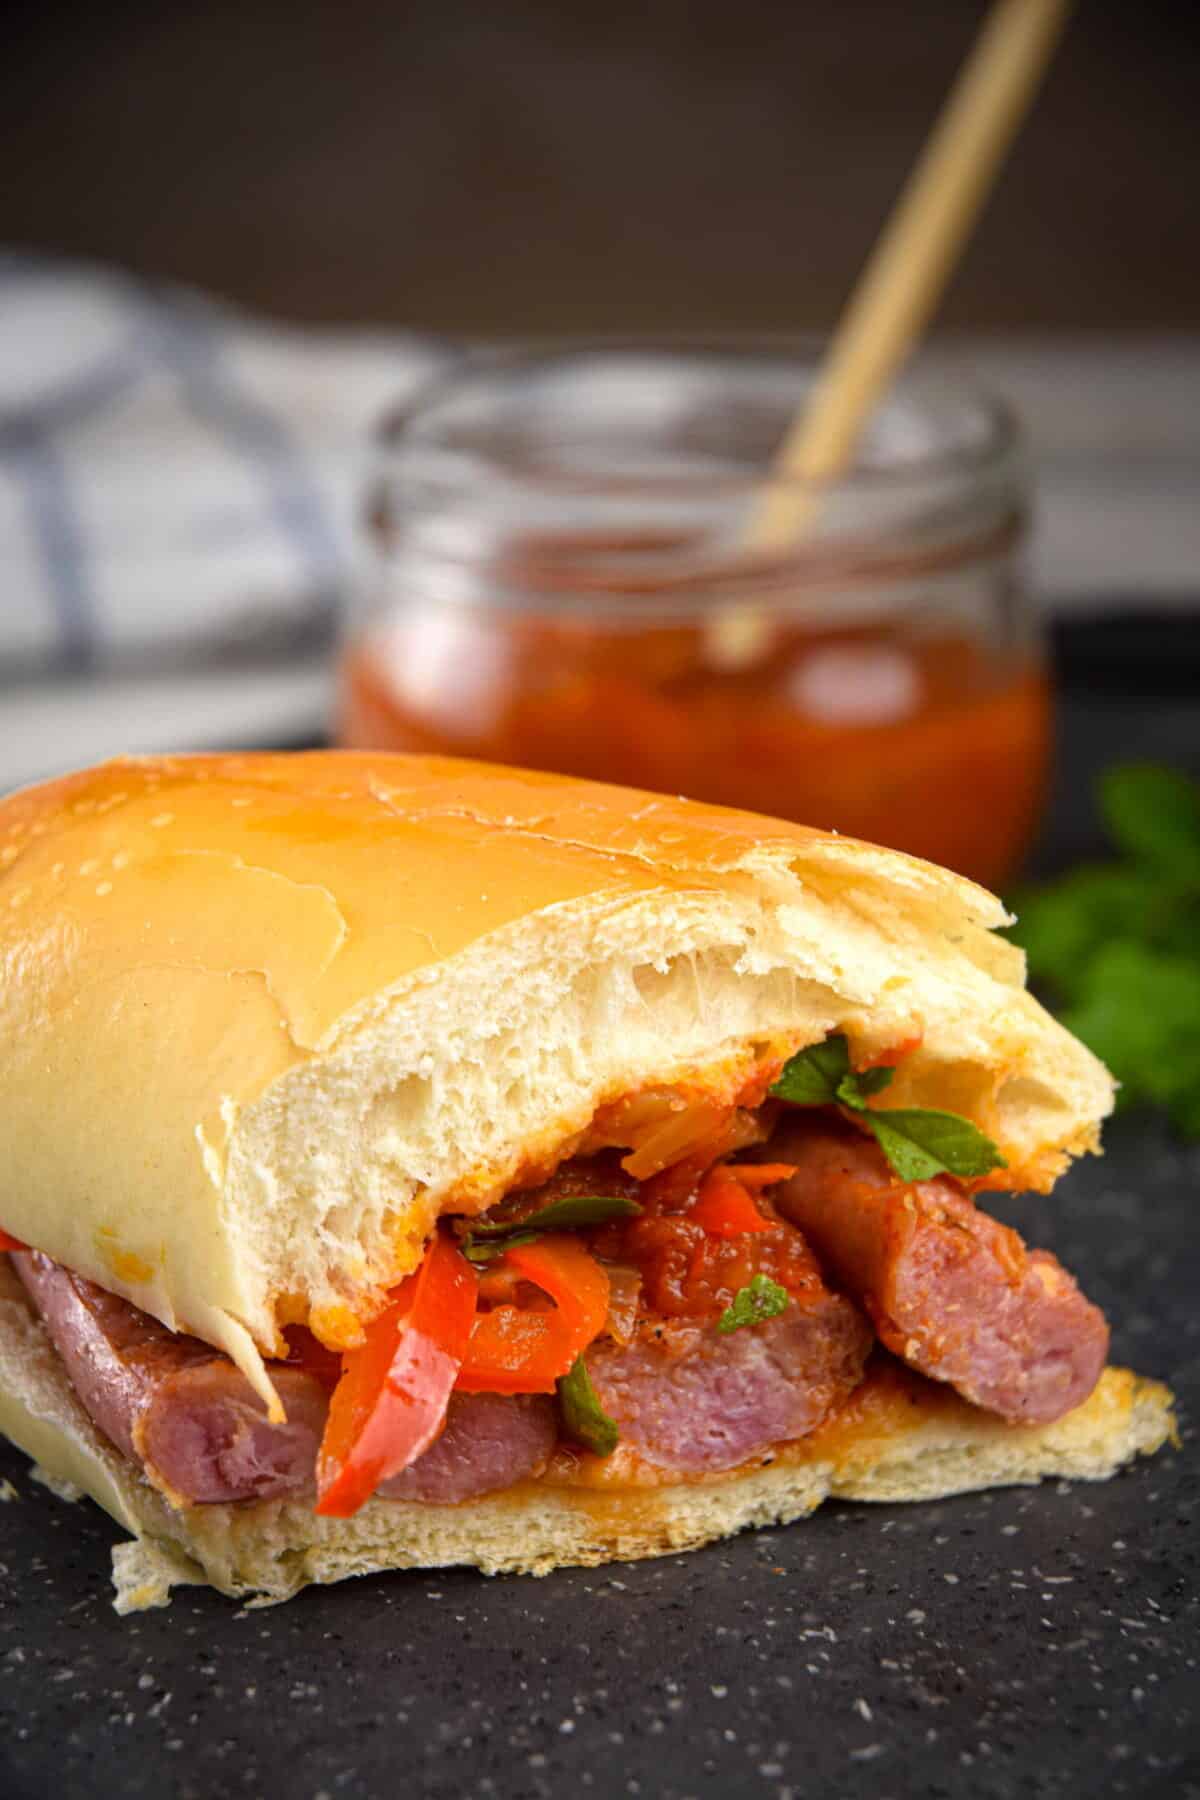 Italian sausage sandwich with a jar of pepper sauce in the background.